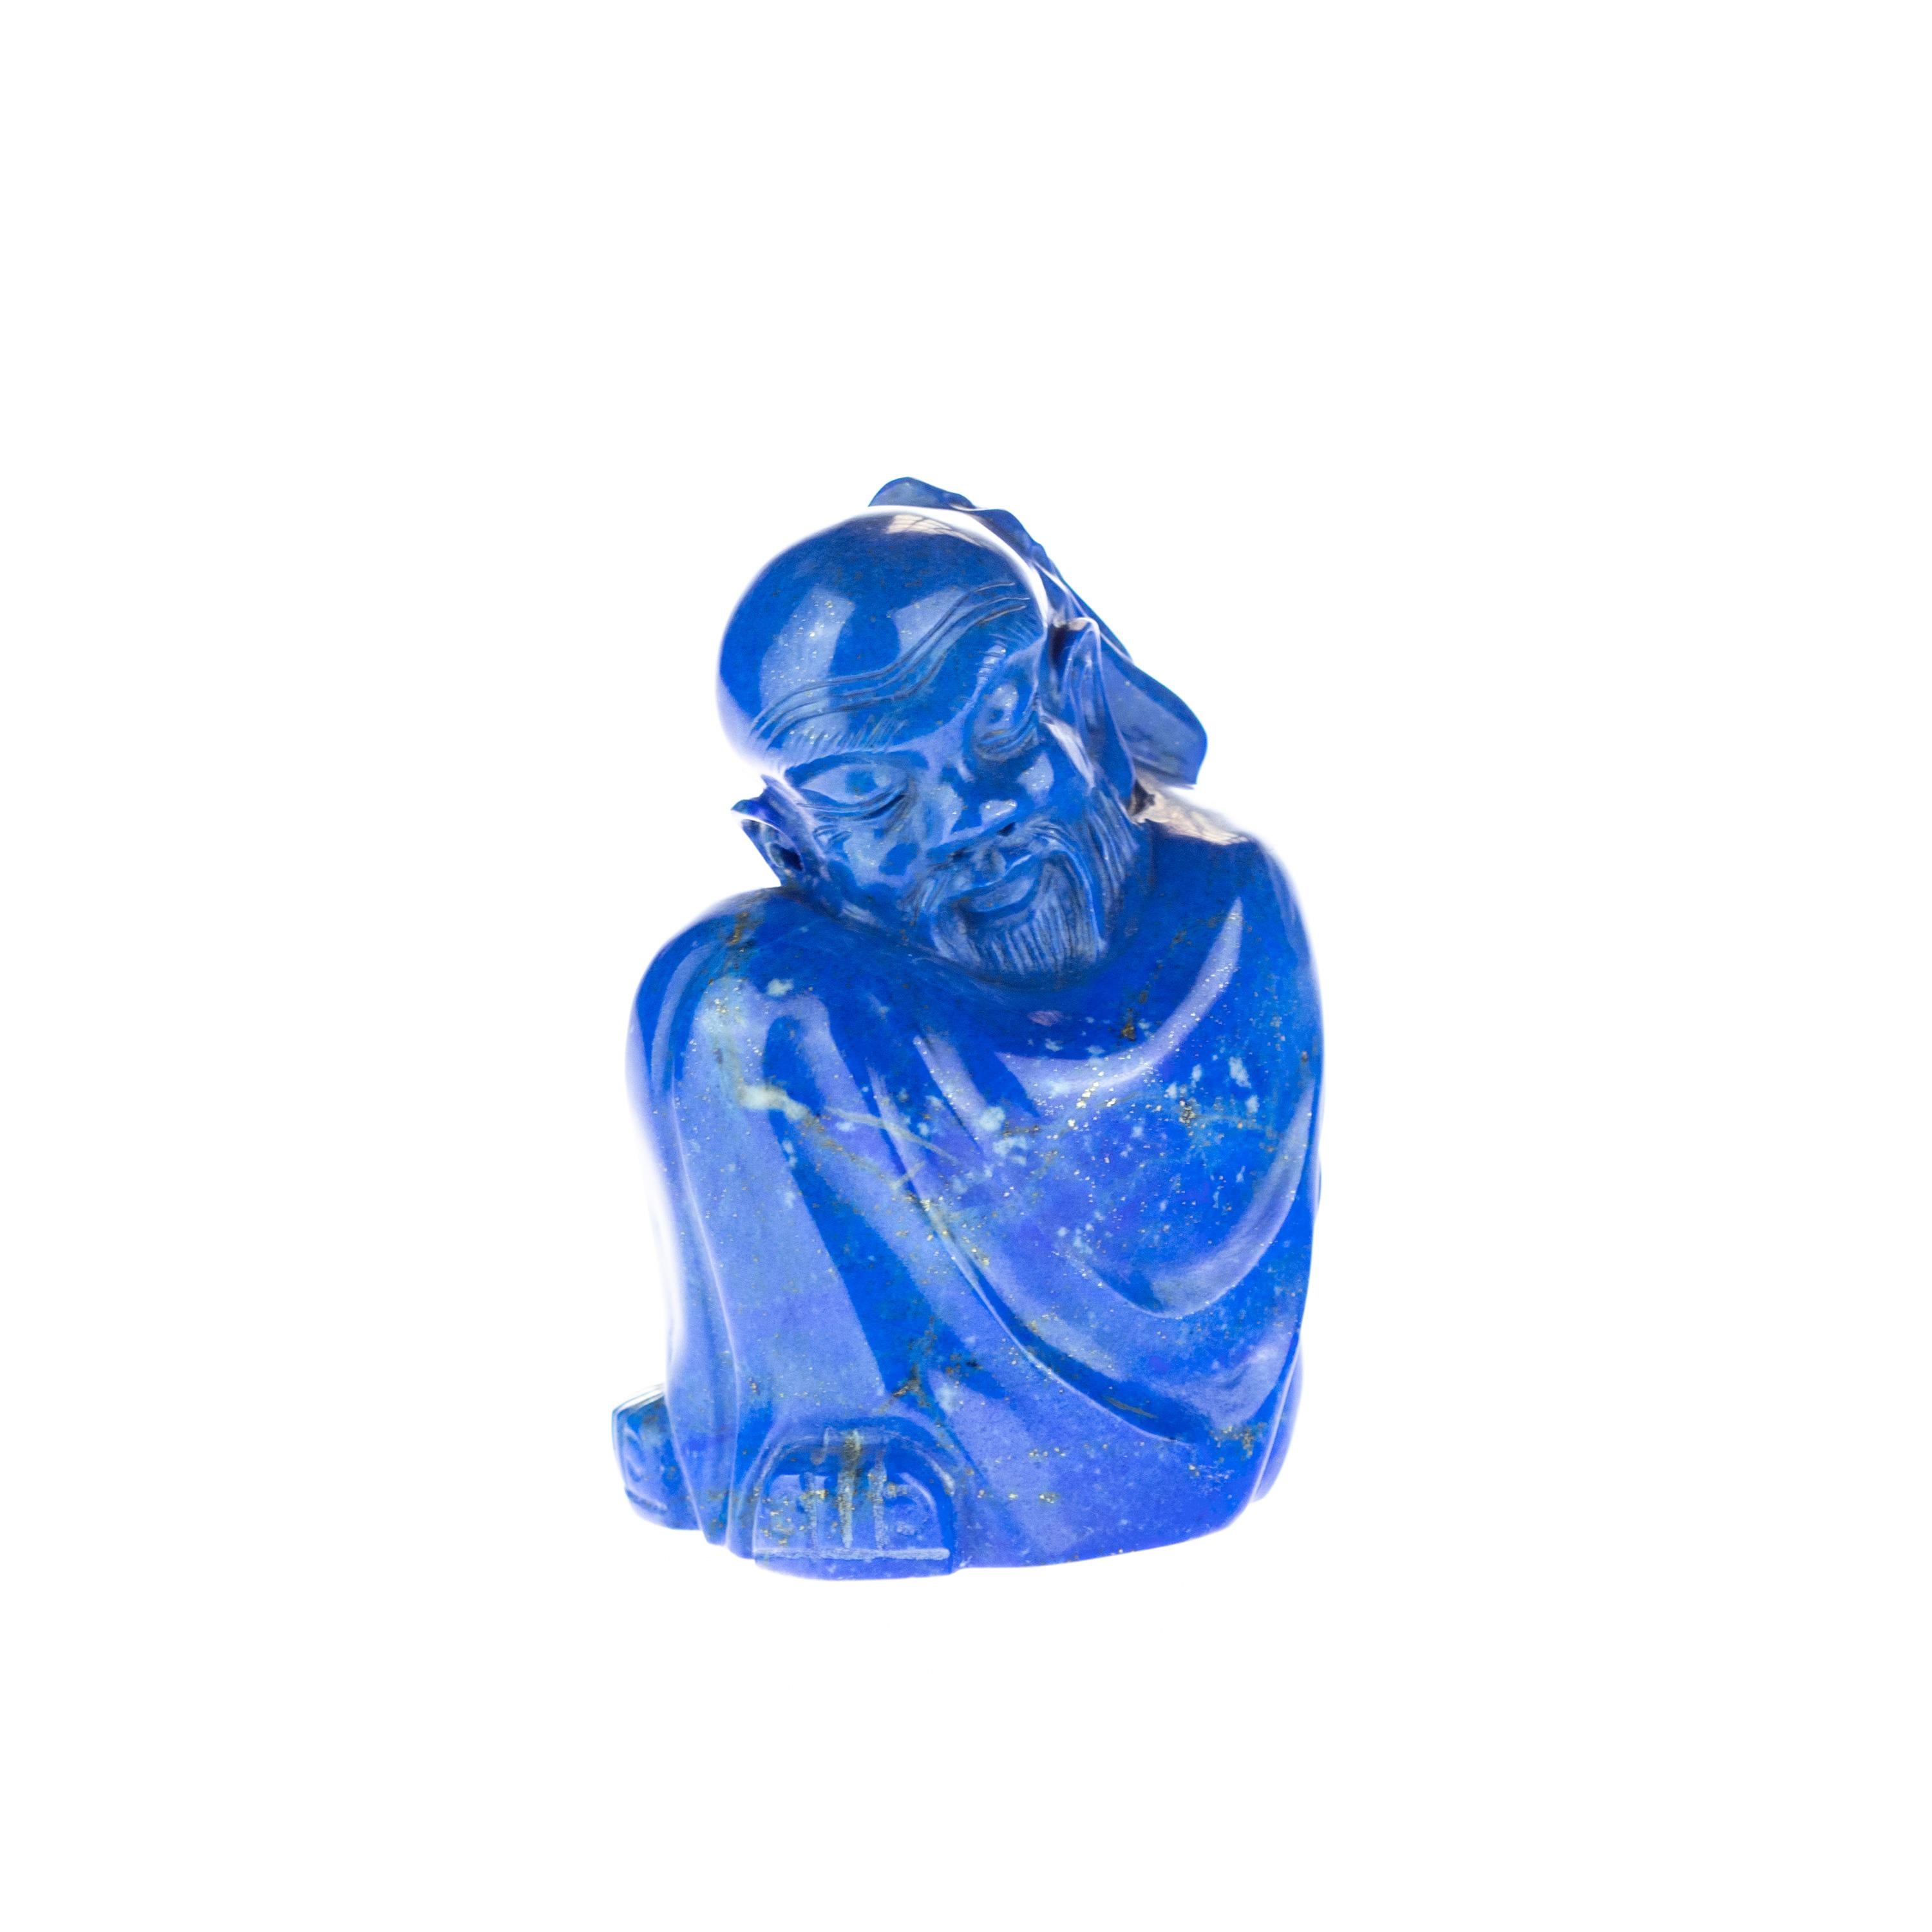 Chinese Export Lapis Lazuli Wise Men Figurine Carved Human Culture Artisanal Statue Sculpture For Sale